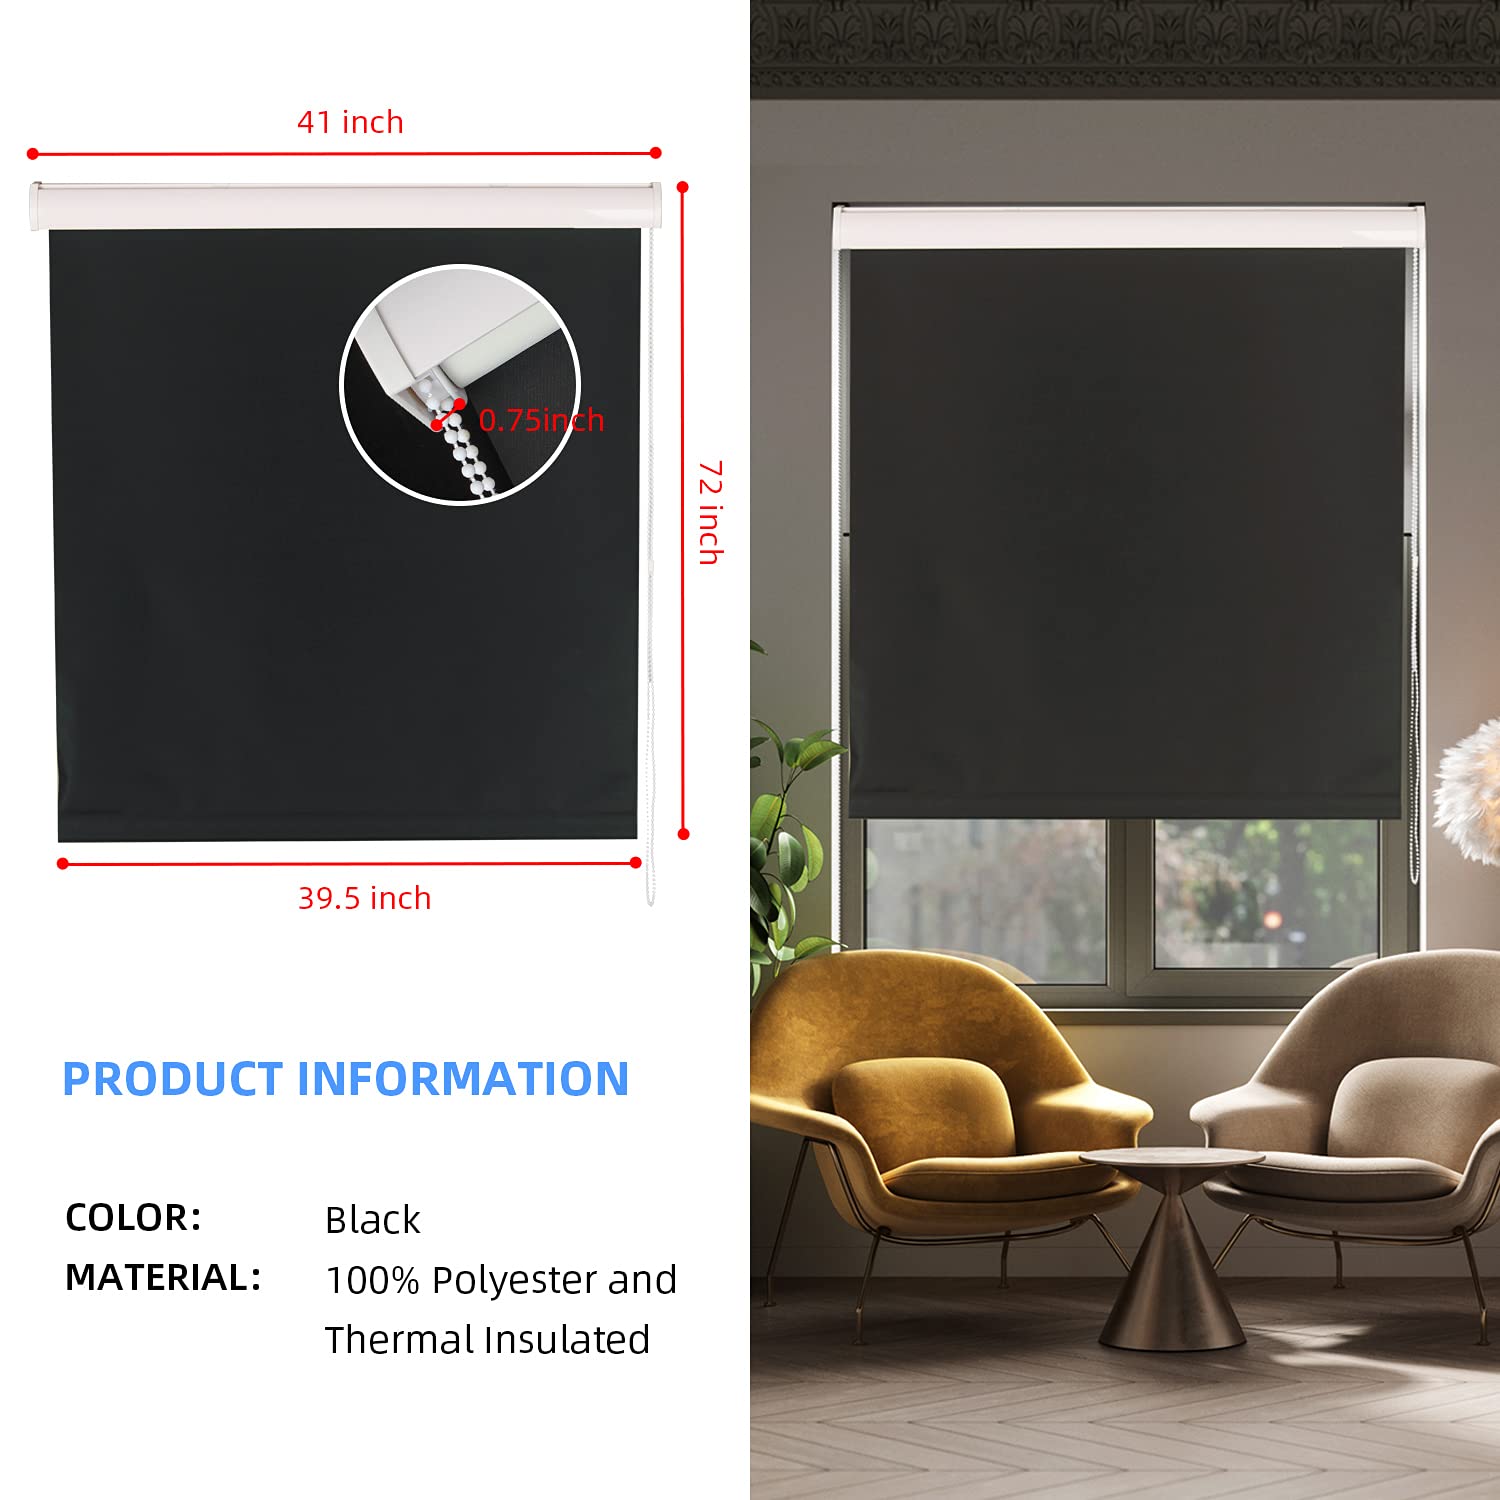 Roller Blinds for Windows Blackout Waterproof Fabric Thermal Insulated, UV Protection , Window Shades Perfect for Living Room, Office, Bathroom and More, Easy to Install